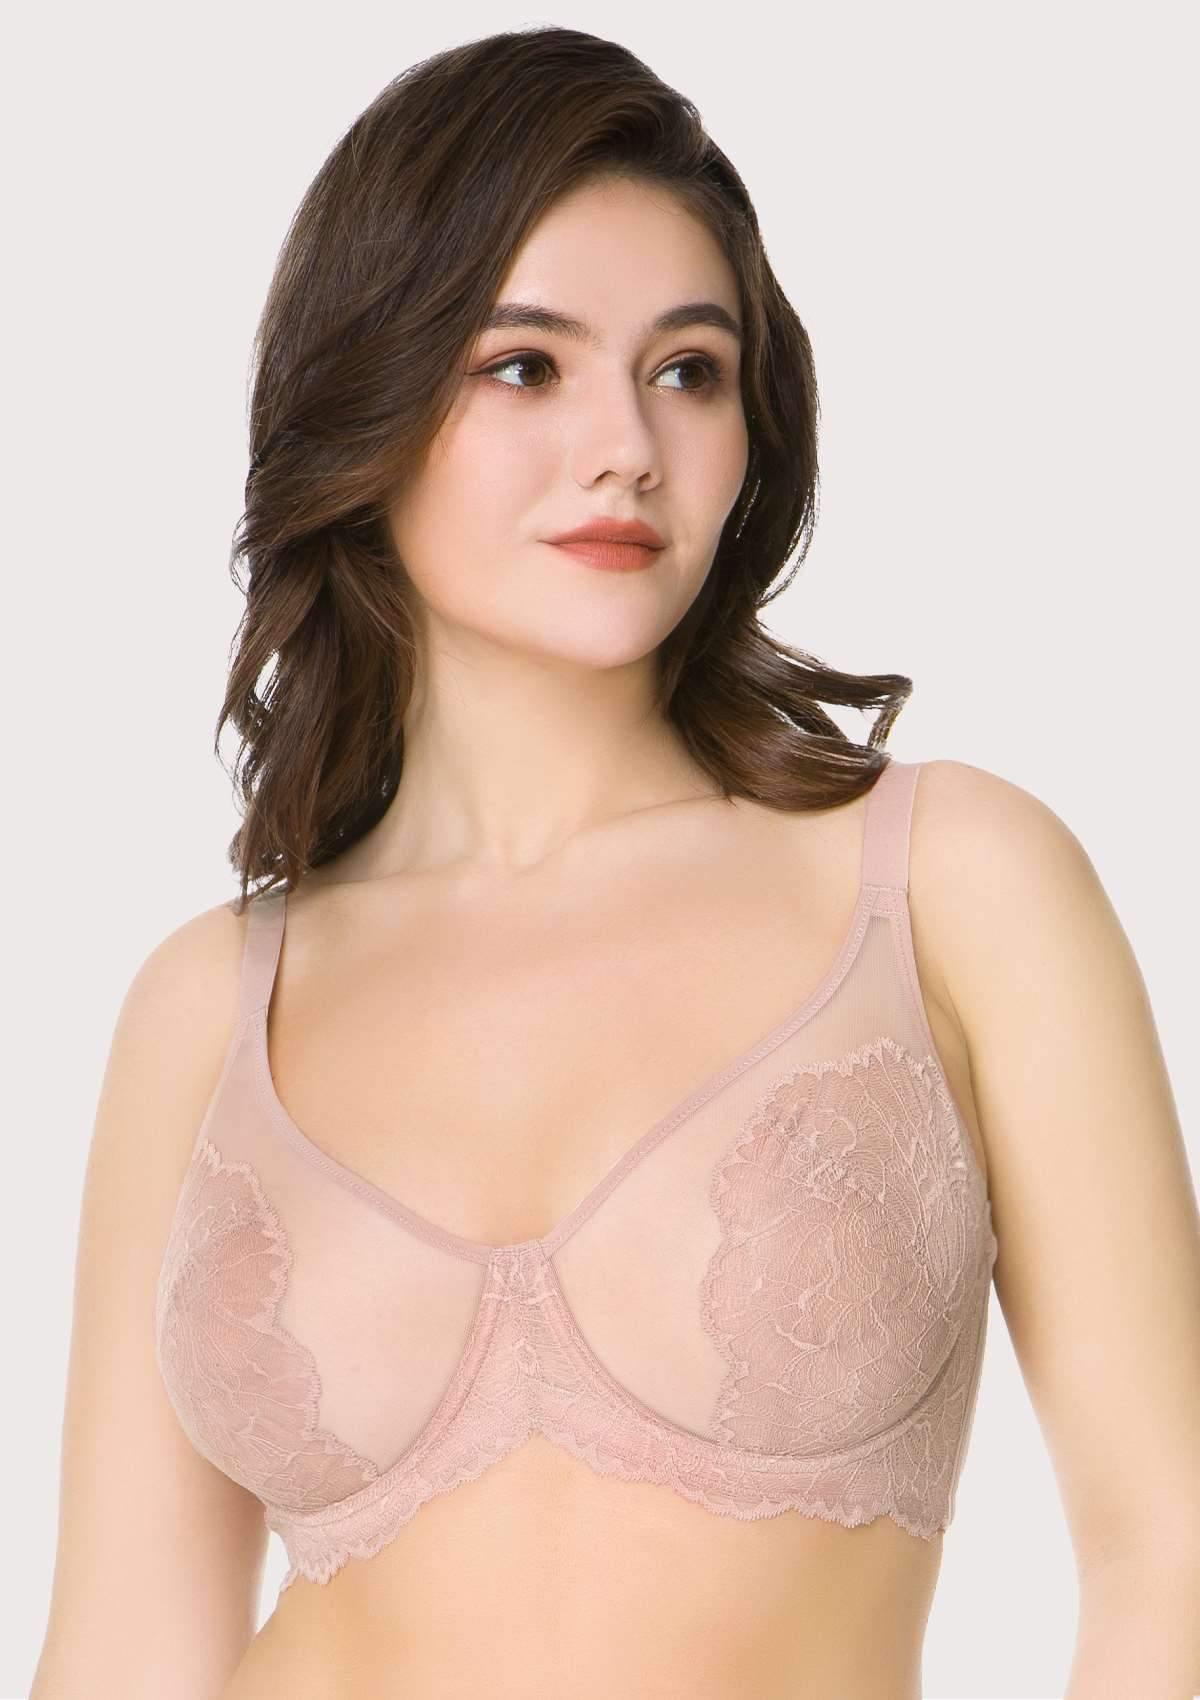 HSIA Blossom Lace Bra And Panties Set: Best Bra For Large Busts - Dark Pink / 40 / DDD/F